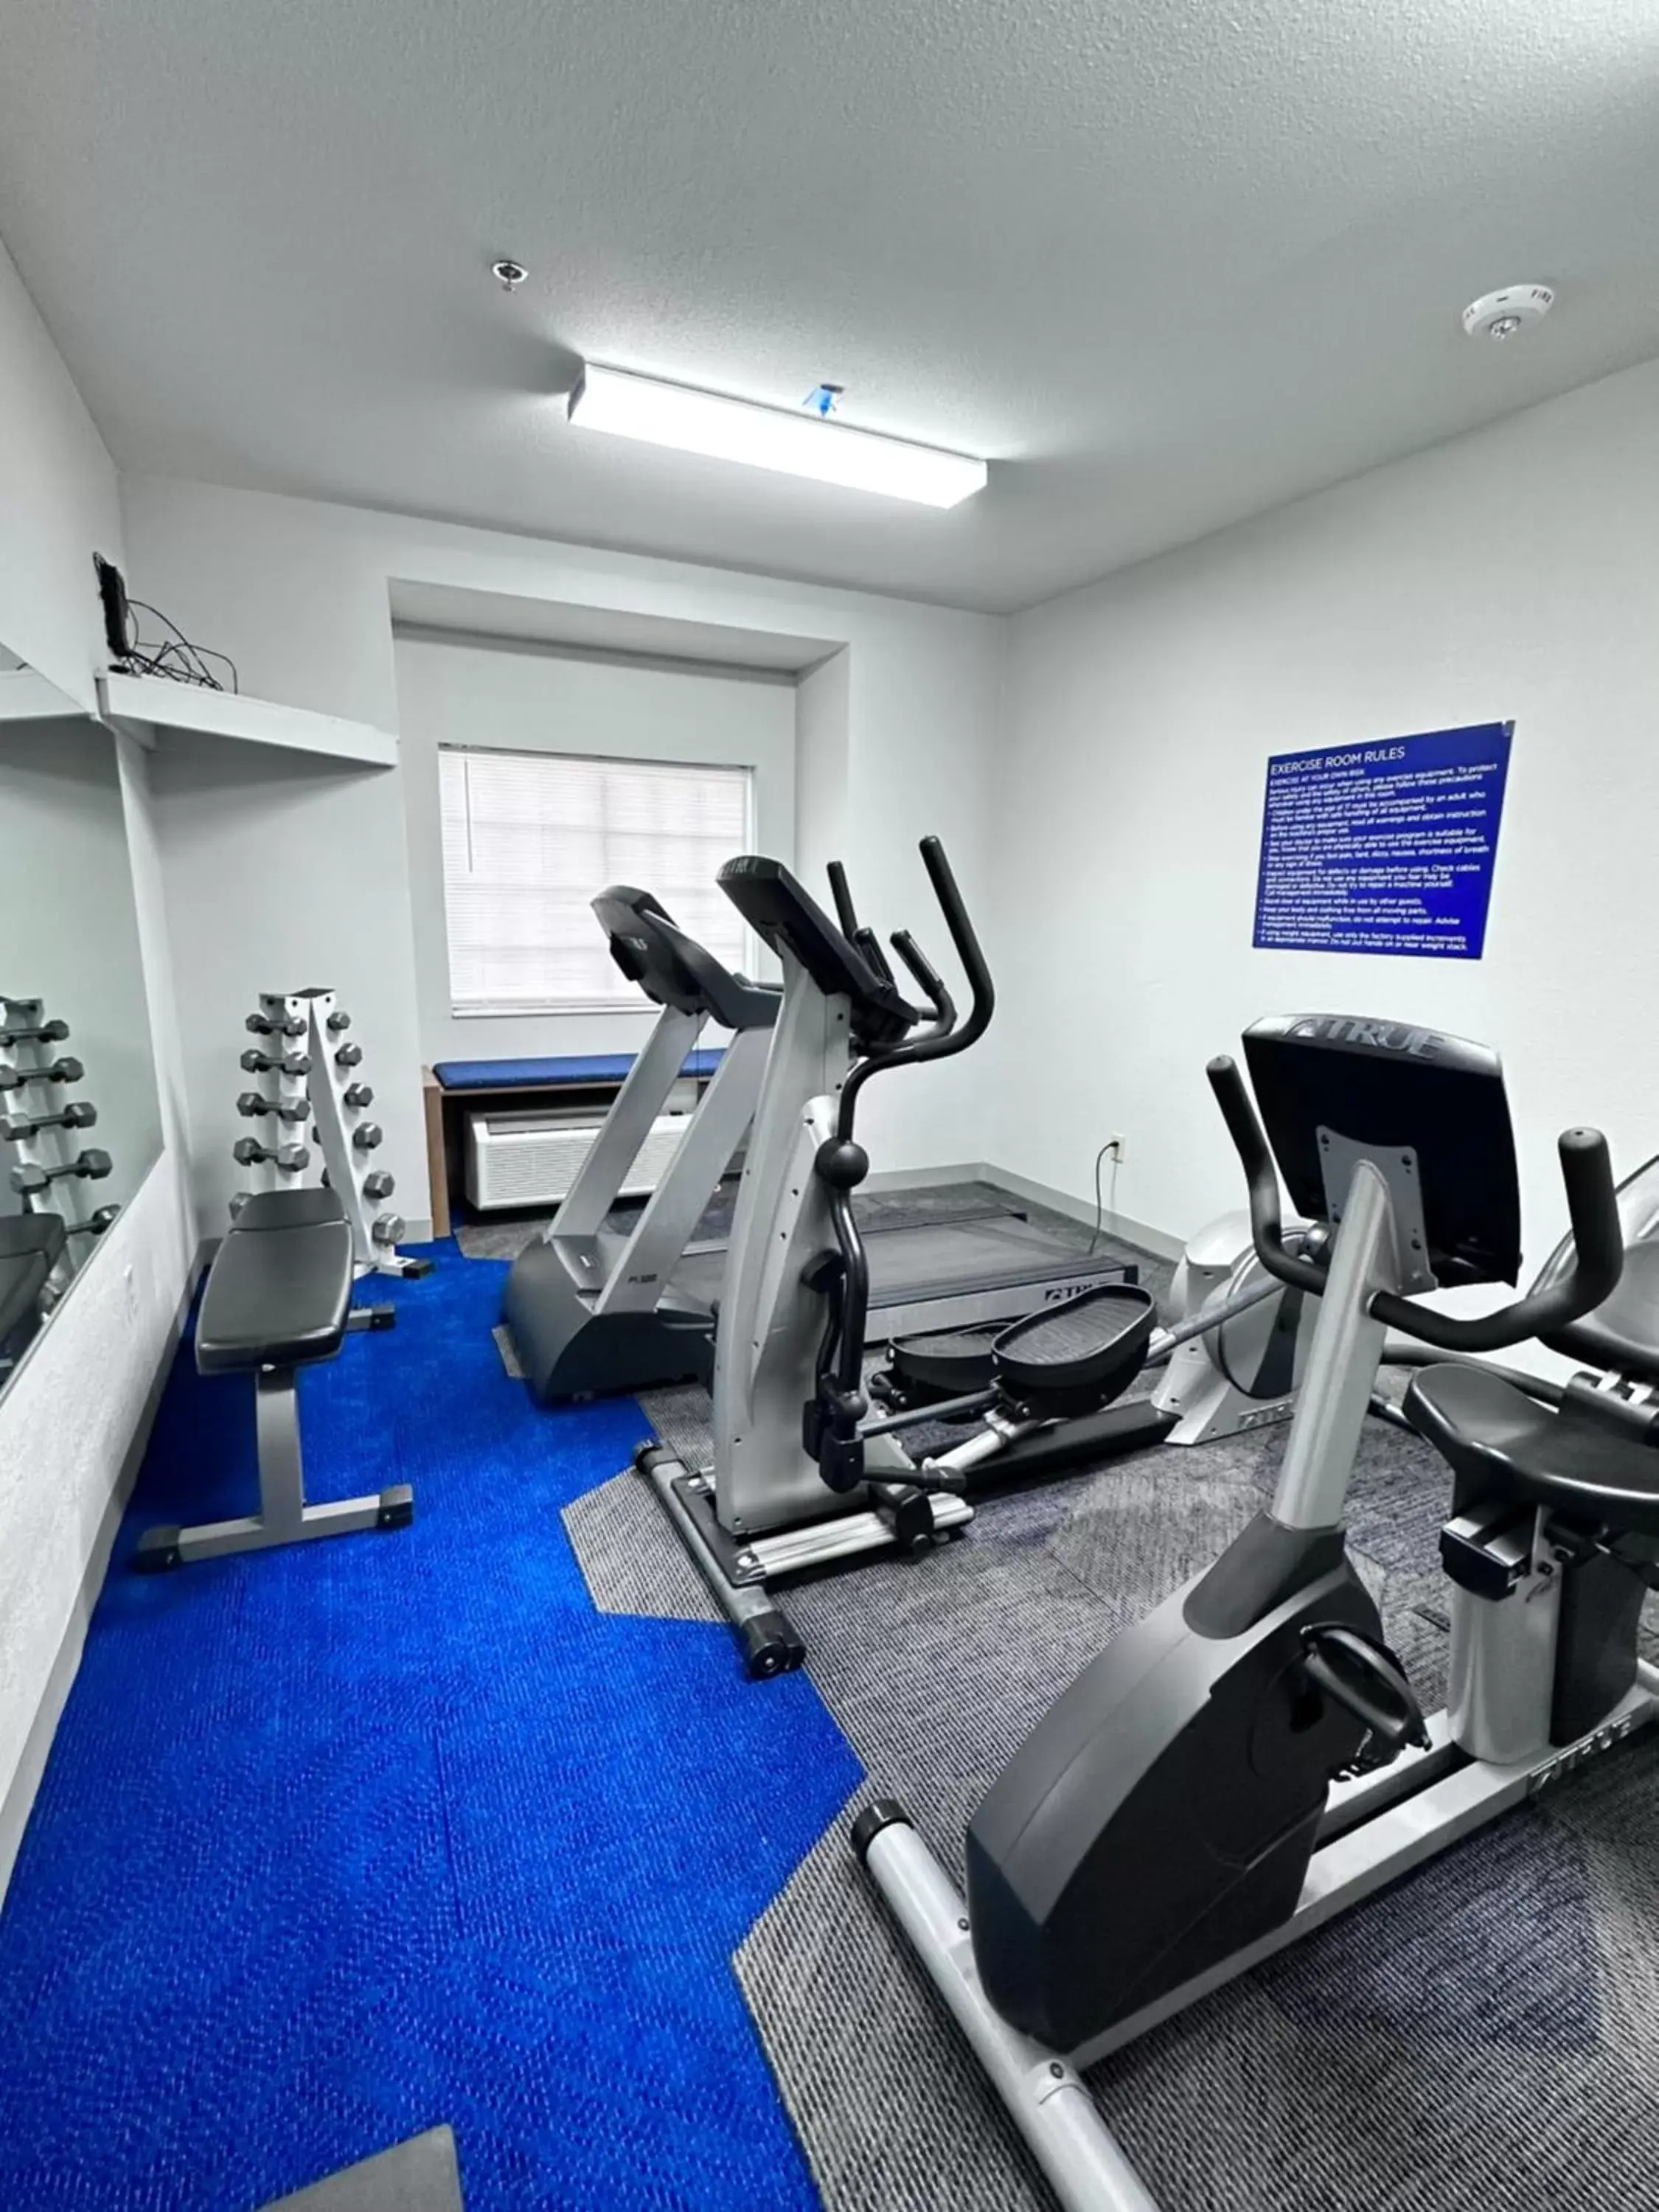 Fitness centre/facilities, Fitness Center/Facilities in Microtel Inn & Suites by Wyndham of Houma